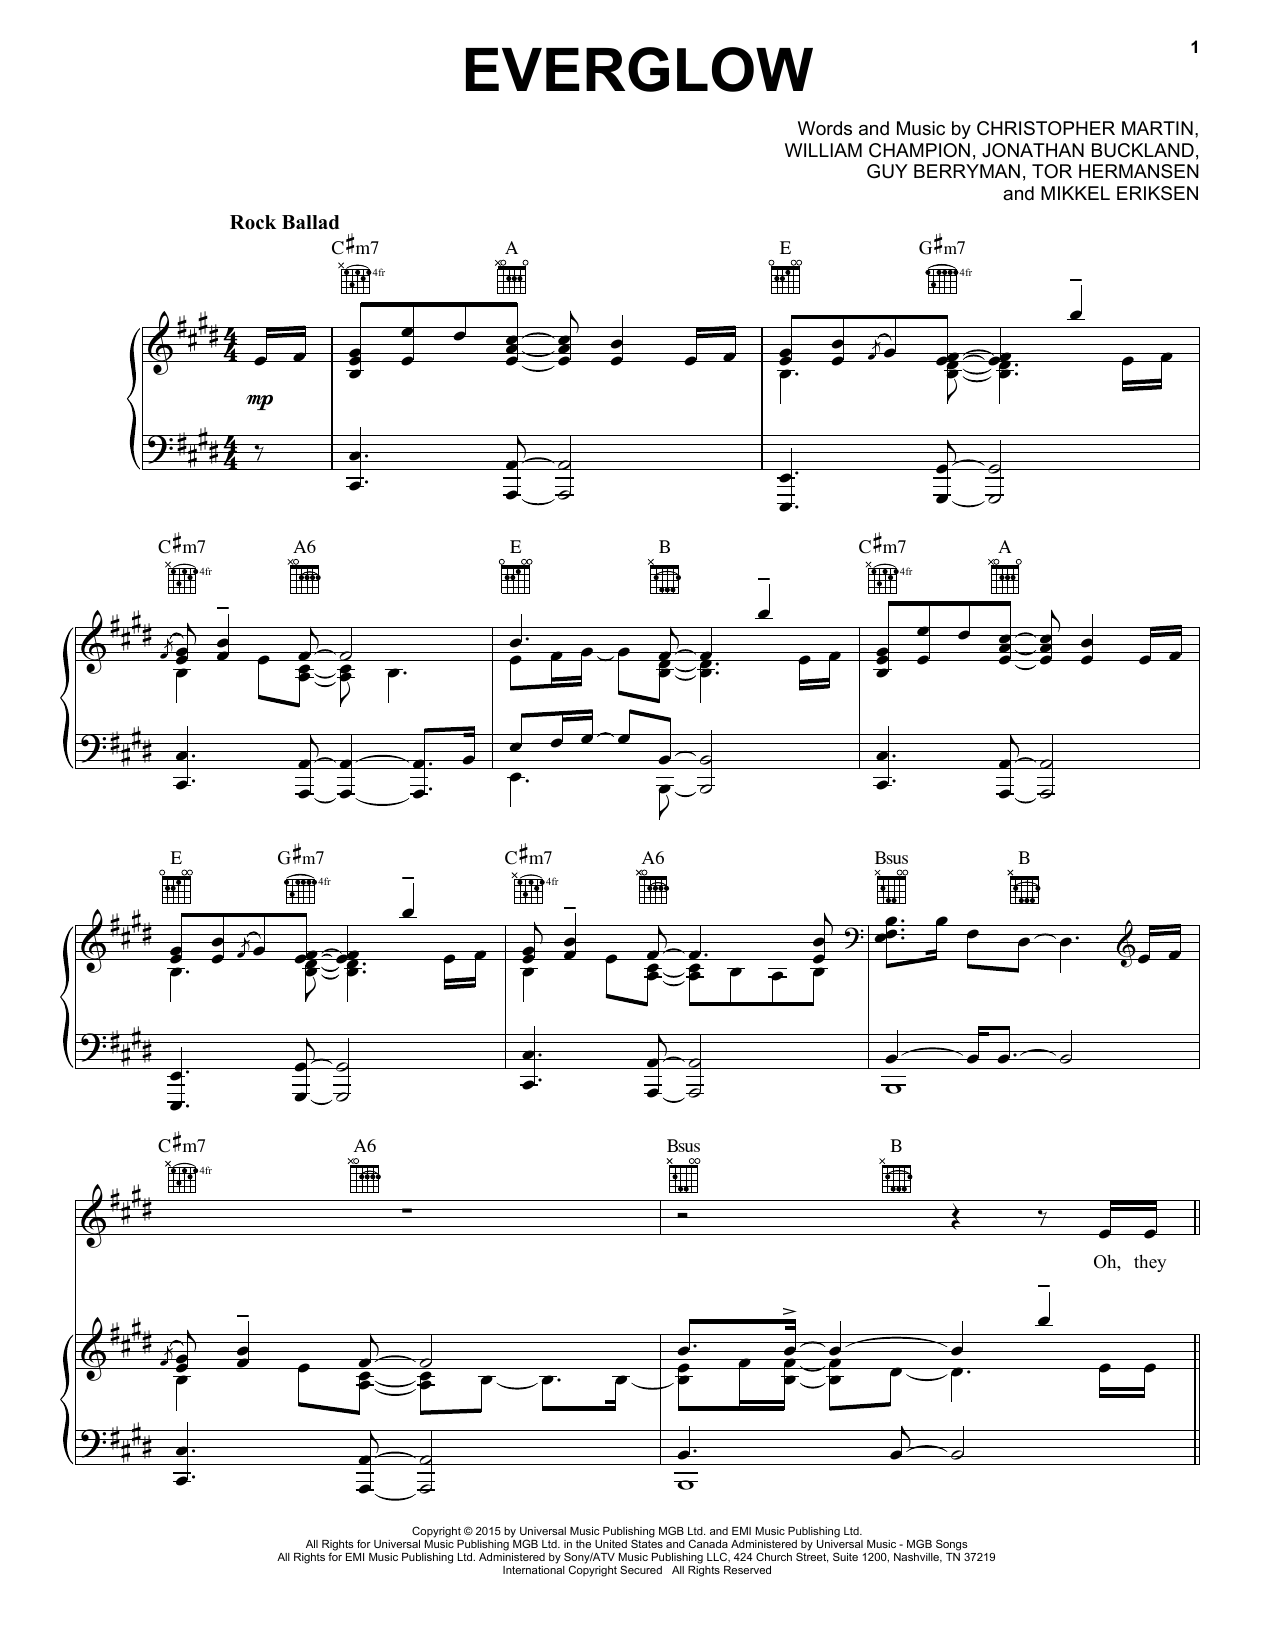 Coldplay "Everglow" Sheet Music Notes, Chords | Piano, Vocal & Guitar